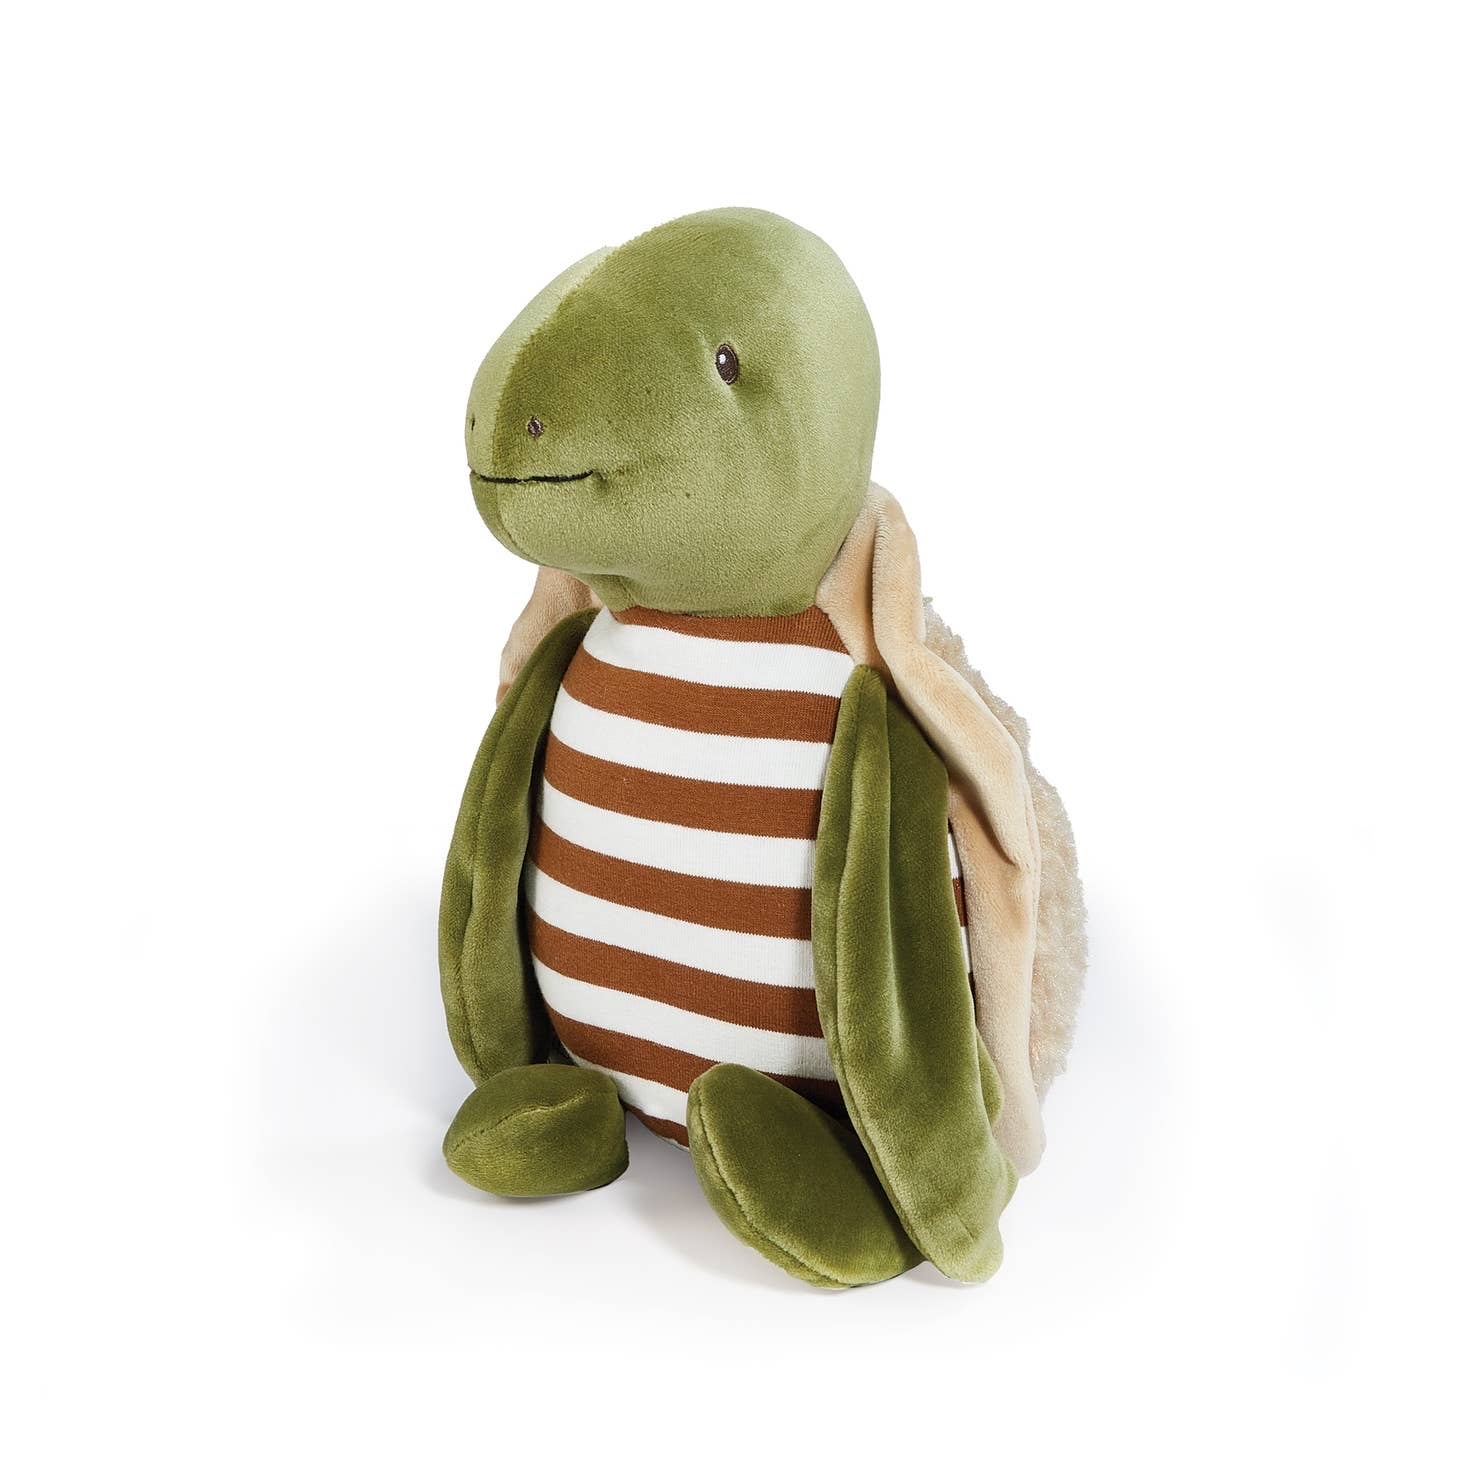 Sheldon the Turtle by Bunnies By The Bay